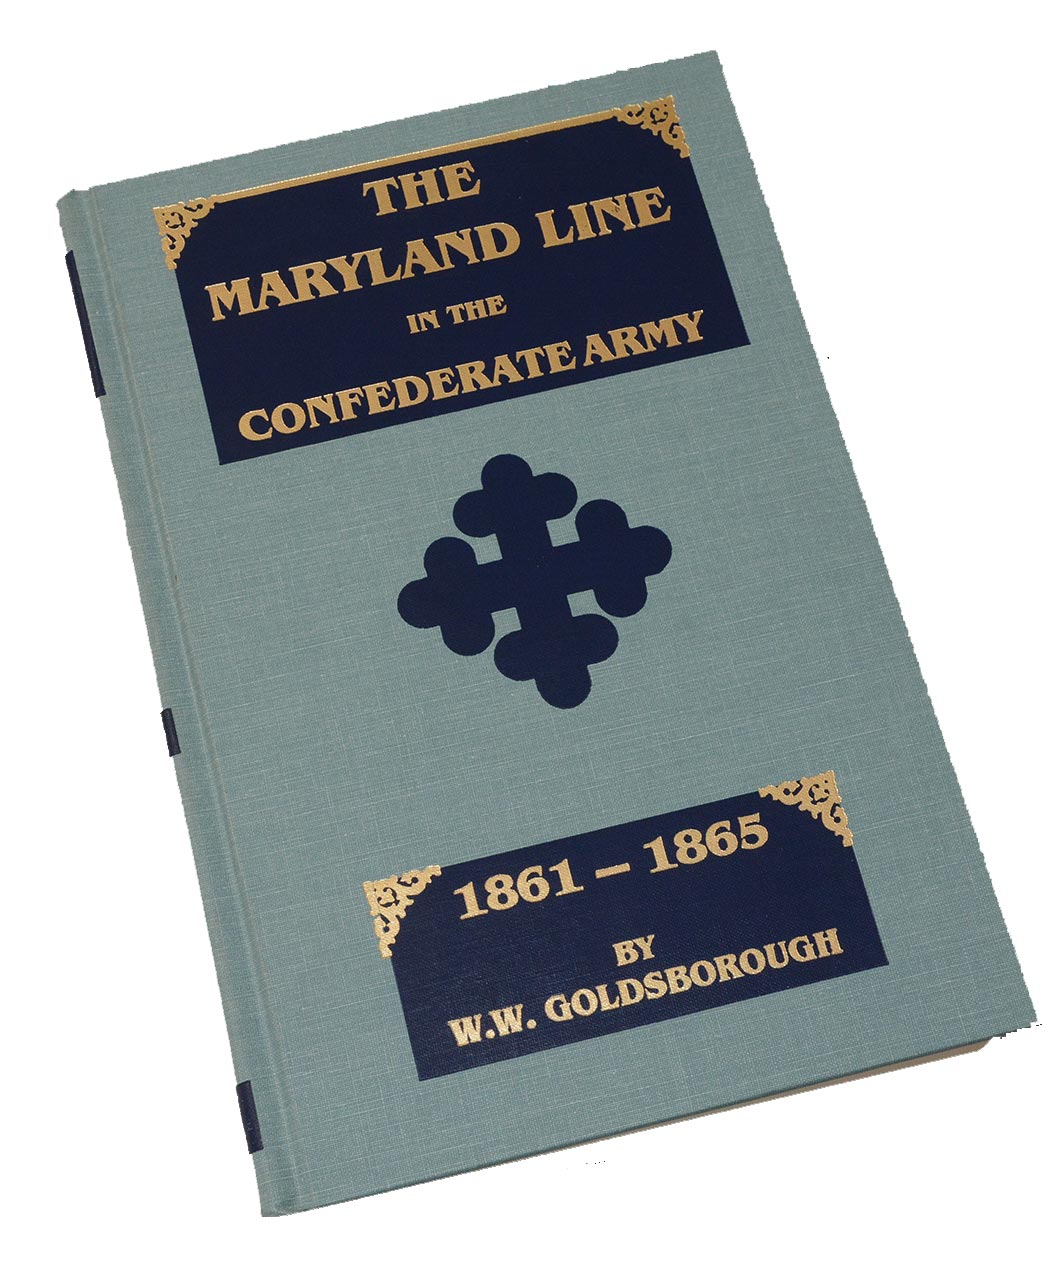 1987 REPRINT COPY OF THE 1900 ORIGINAL – THE MARYLAND LINE IN THE CONFEDERATE ARMY